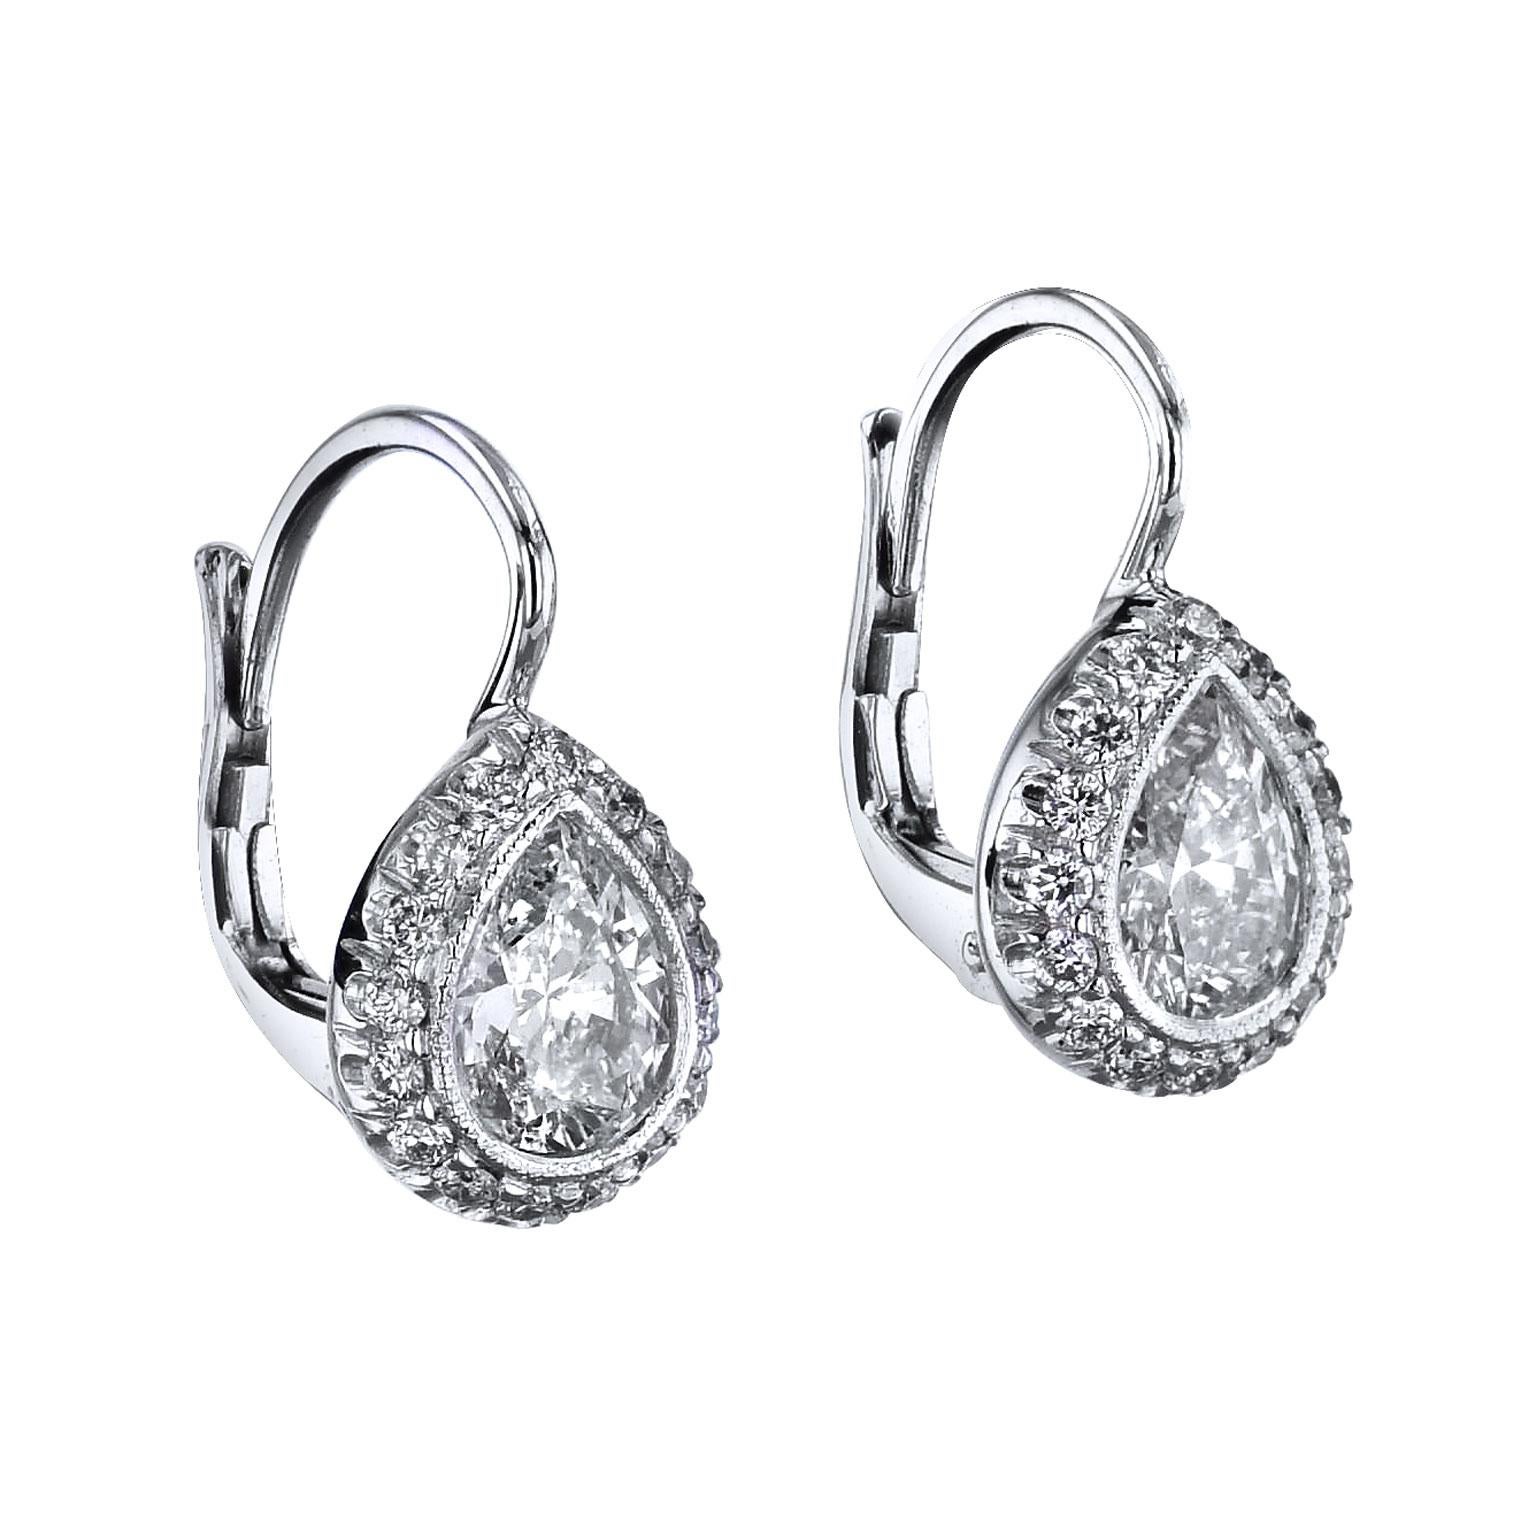 Pear Cut 1.06 Carat Pear Shaped and Pave Set Diamonds in 18 kt Gold Lever-Back Earrings